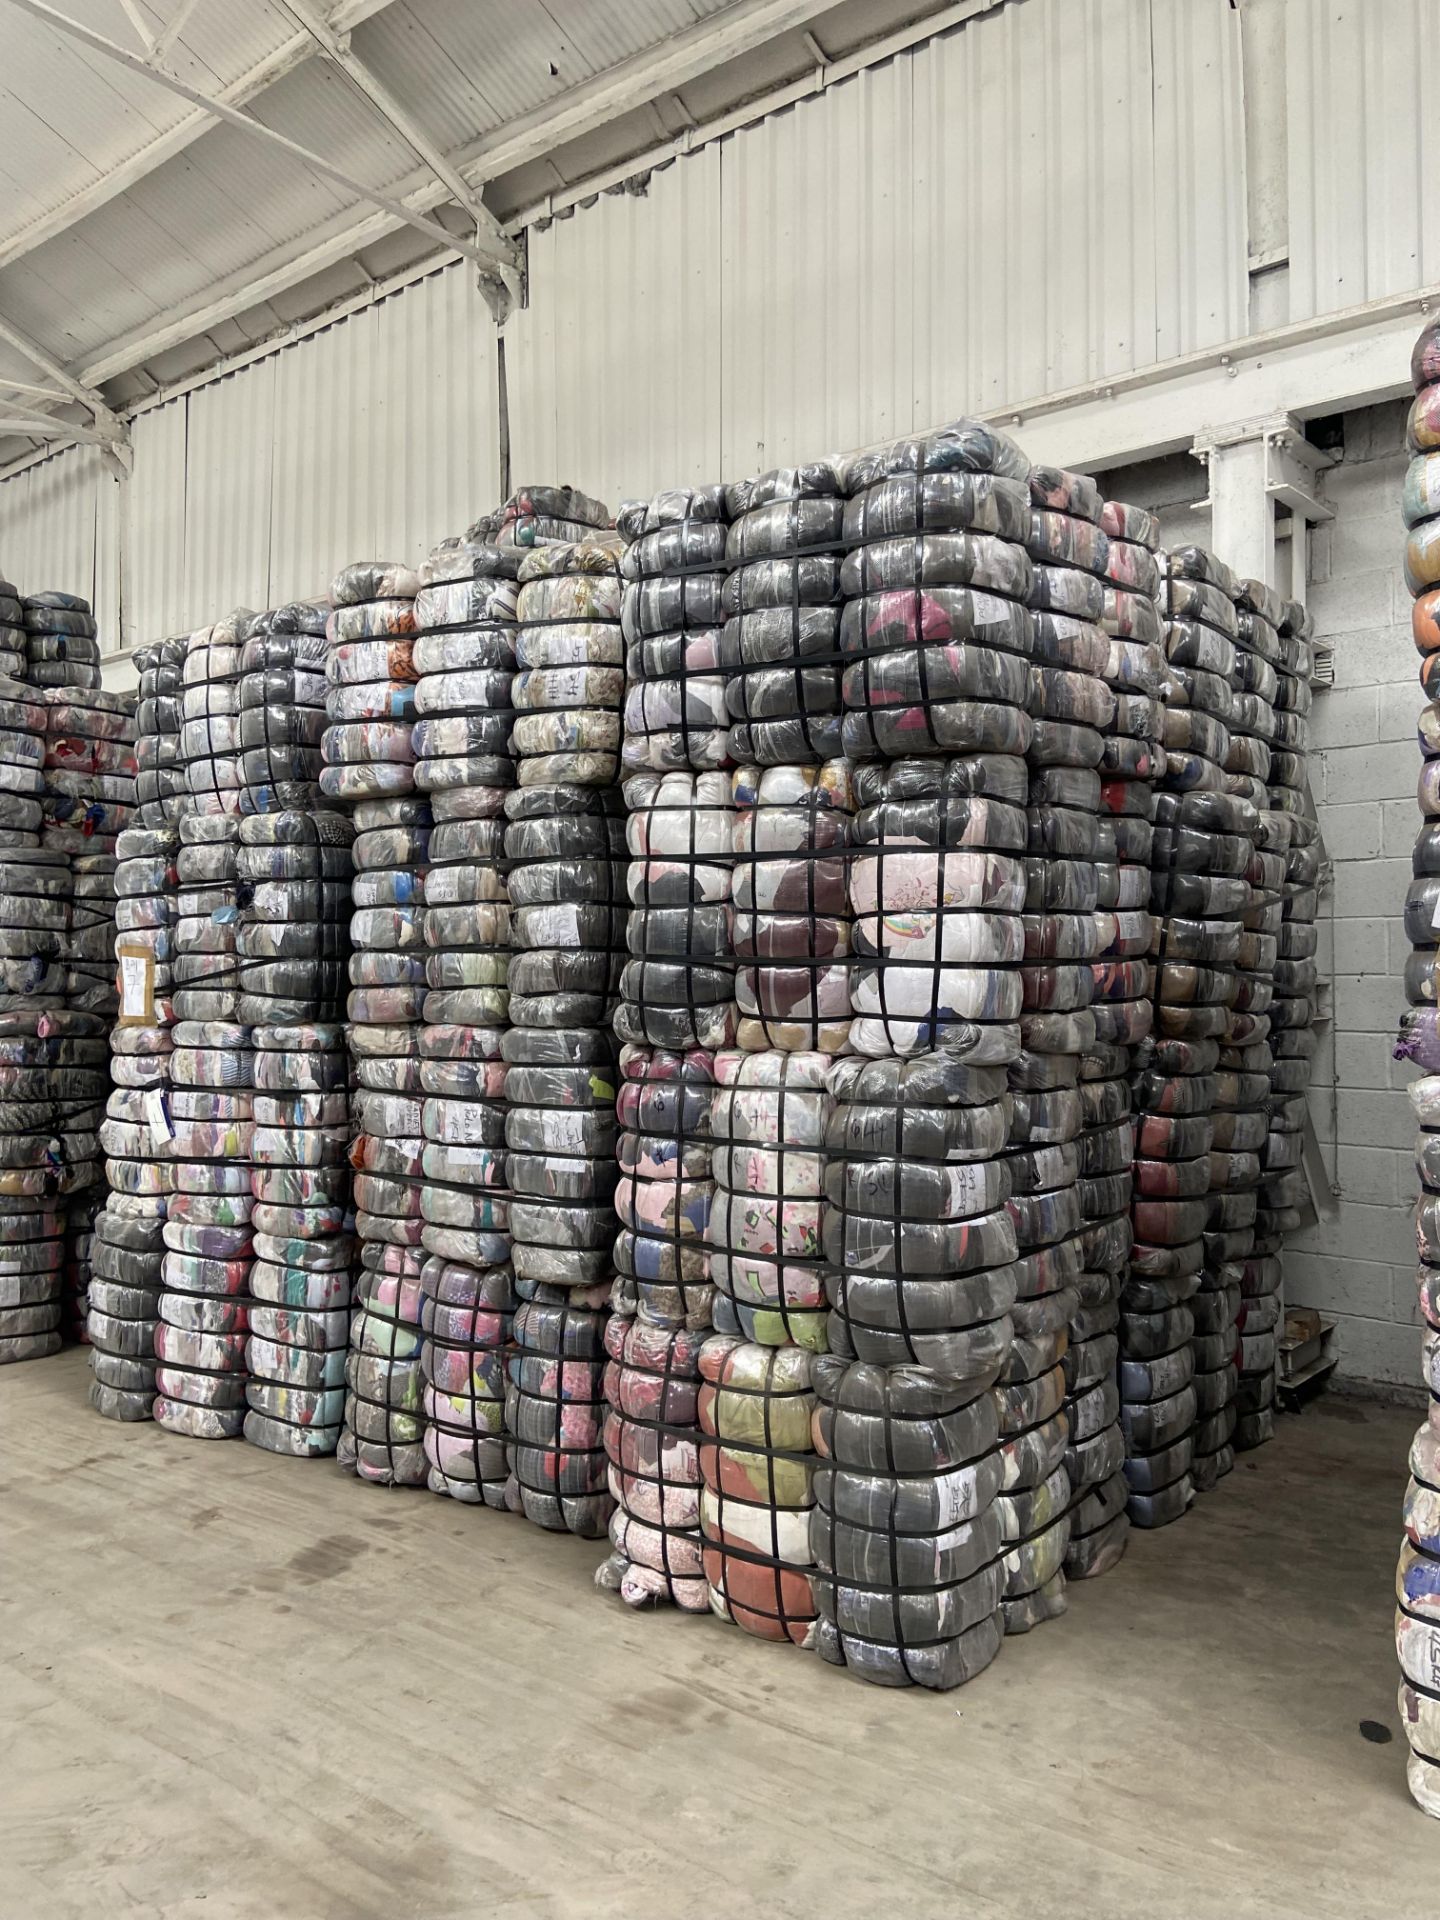 APPROX 216 BALES (9720KG) RECYCLABLE WASTE TEXTILES, understood to comprise: Five bales x 45kg Adult - Image 2 of 8